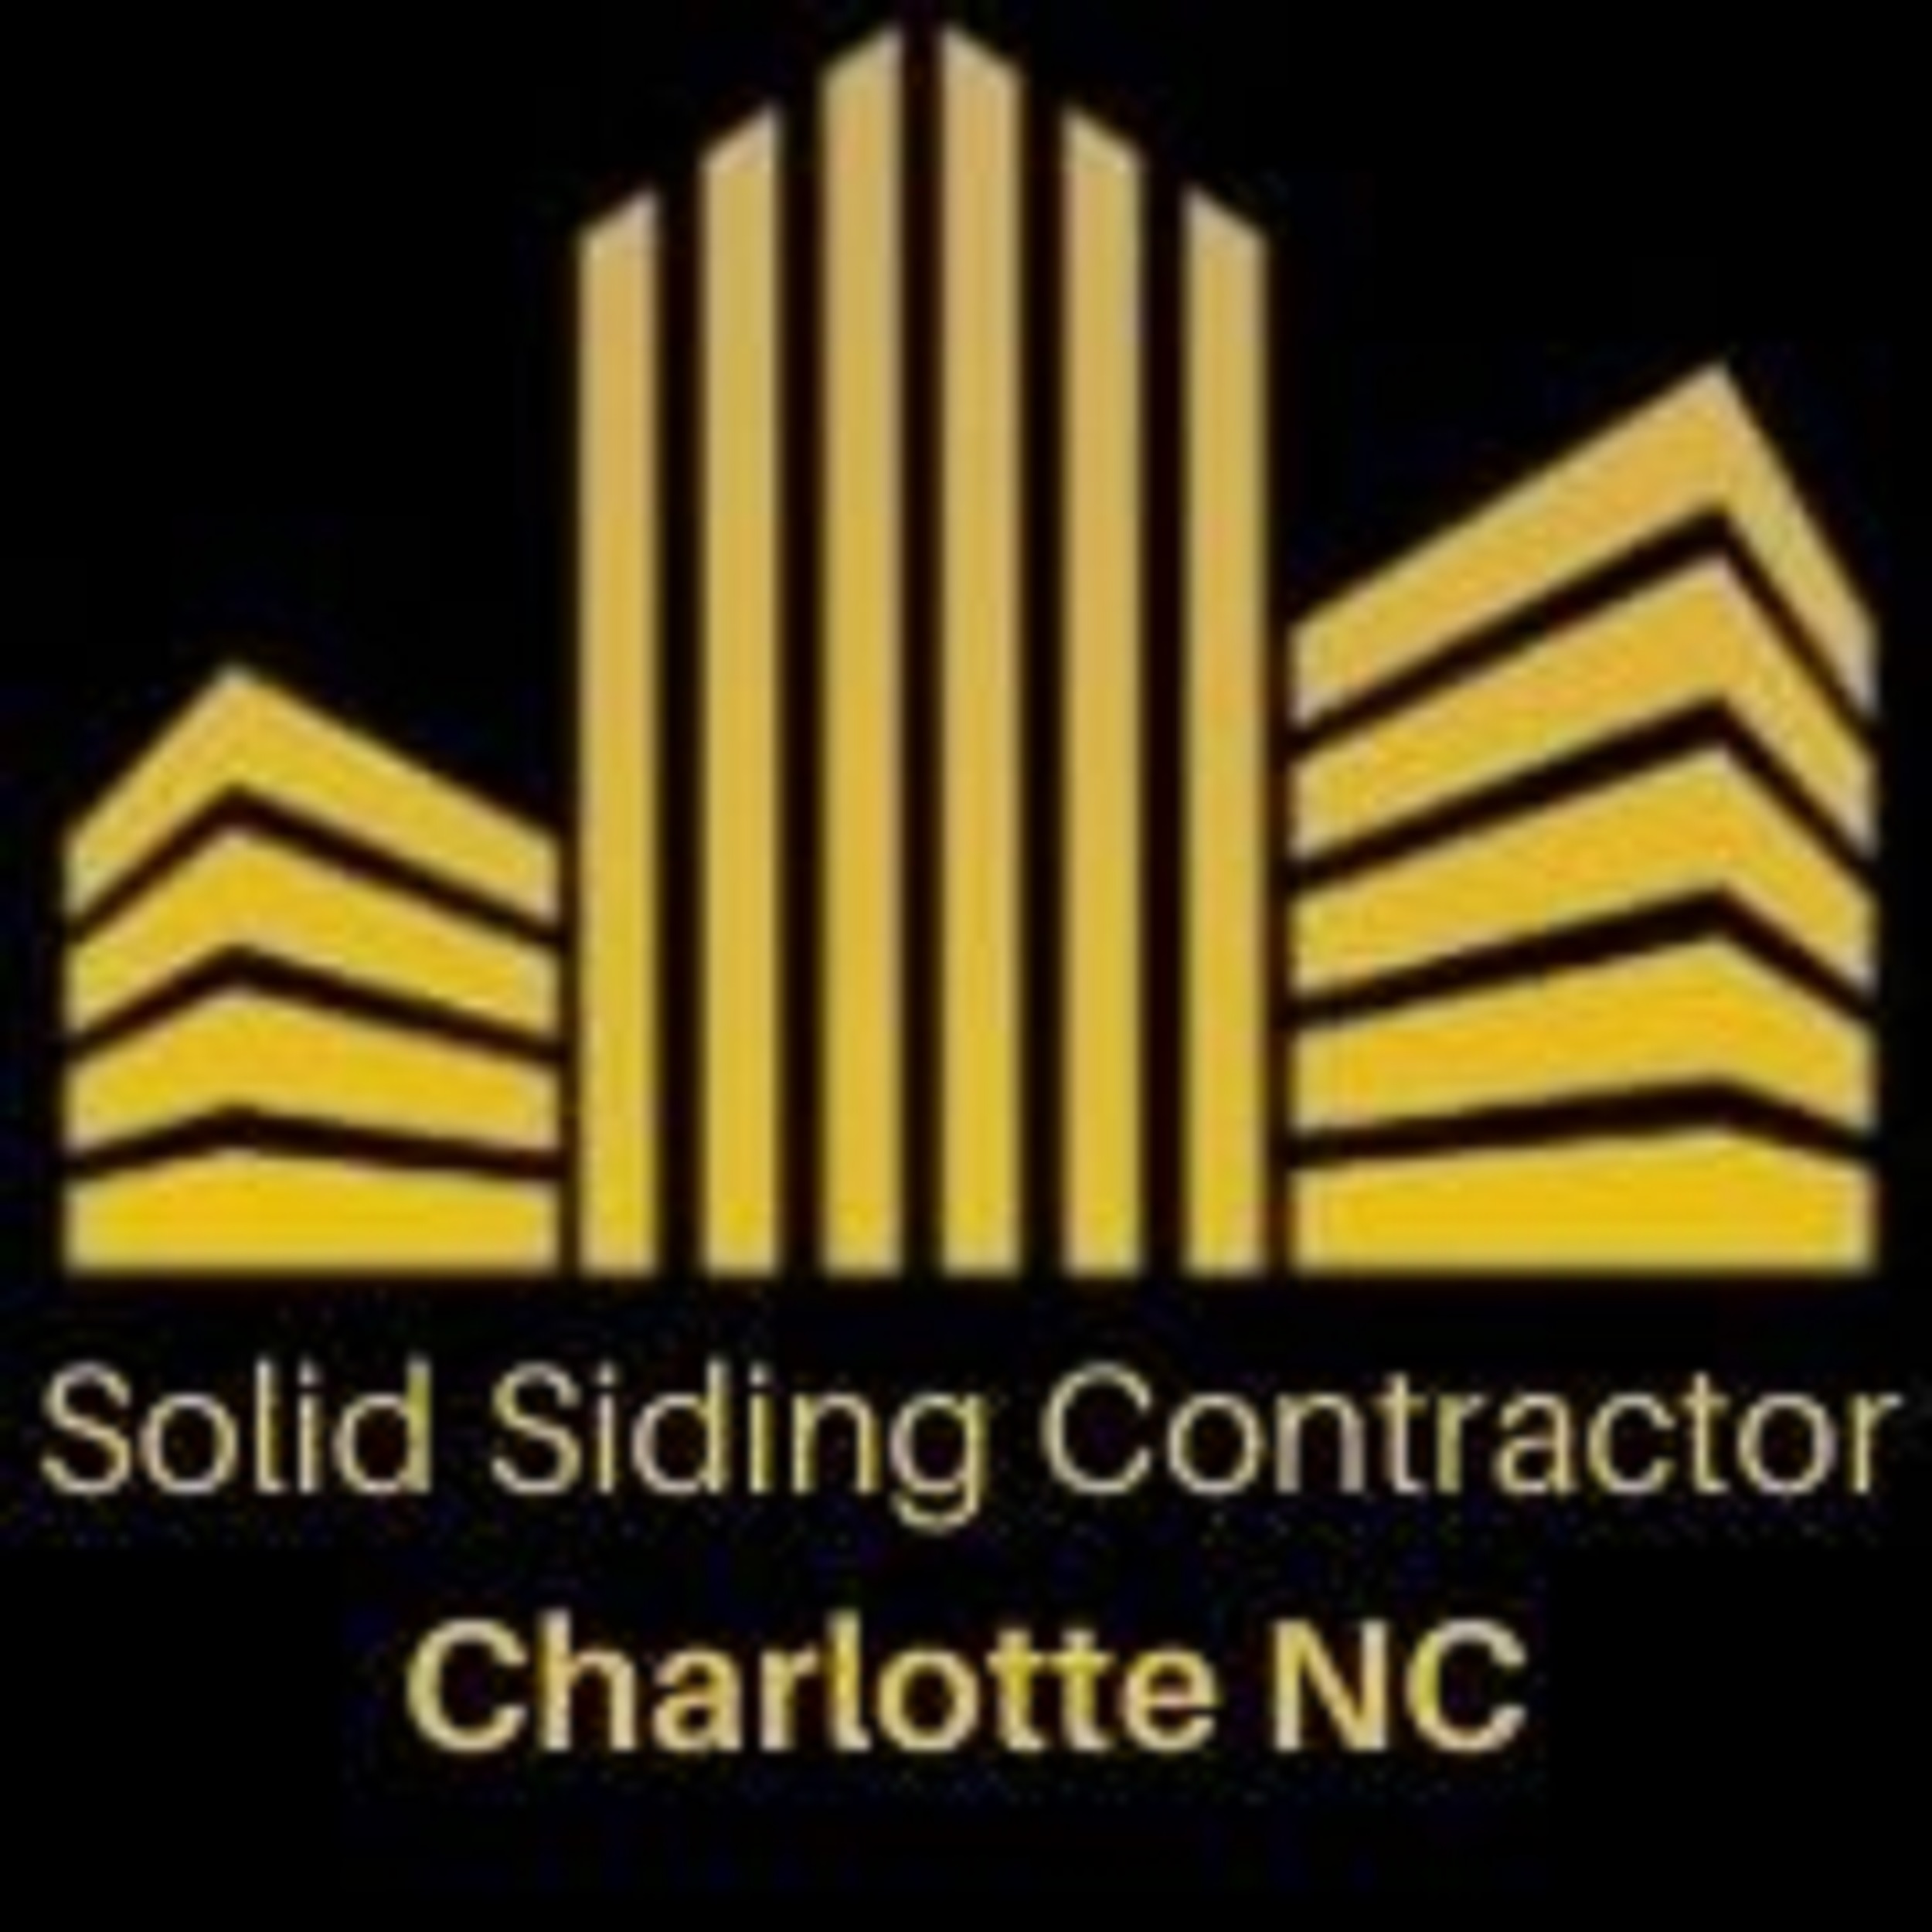 Solid Siding Contractor Charlotte NC's Logo